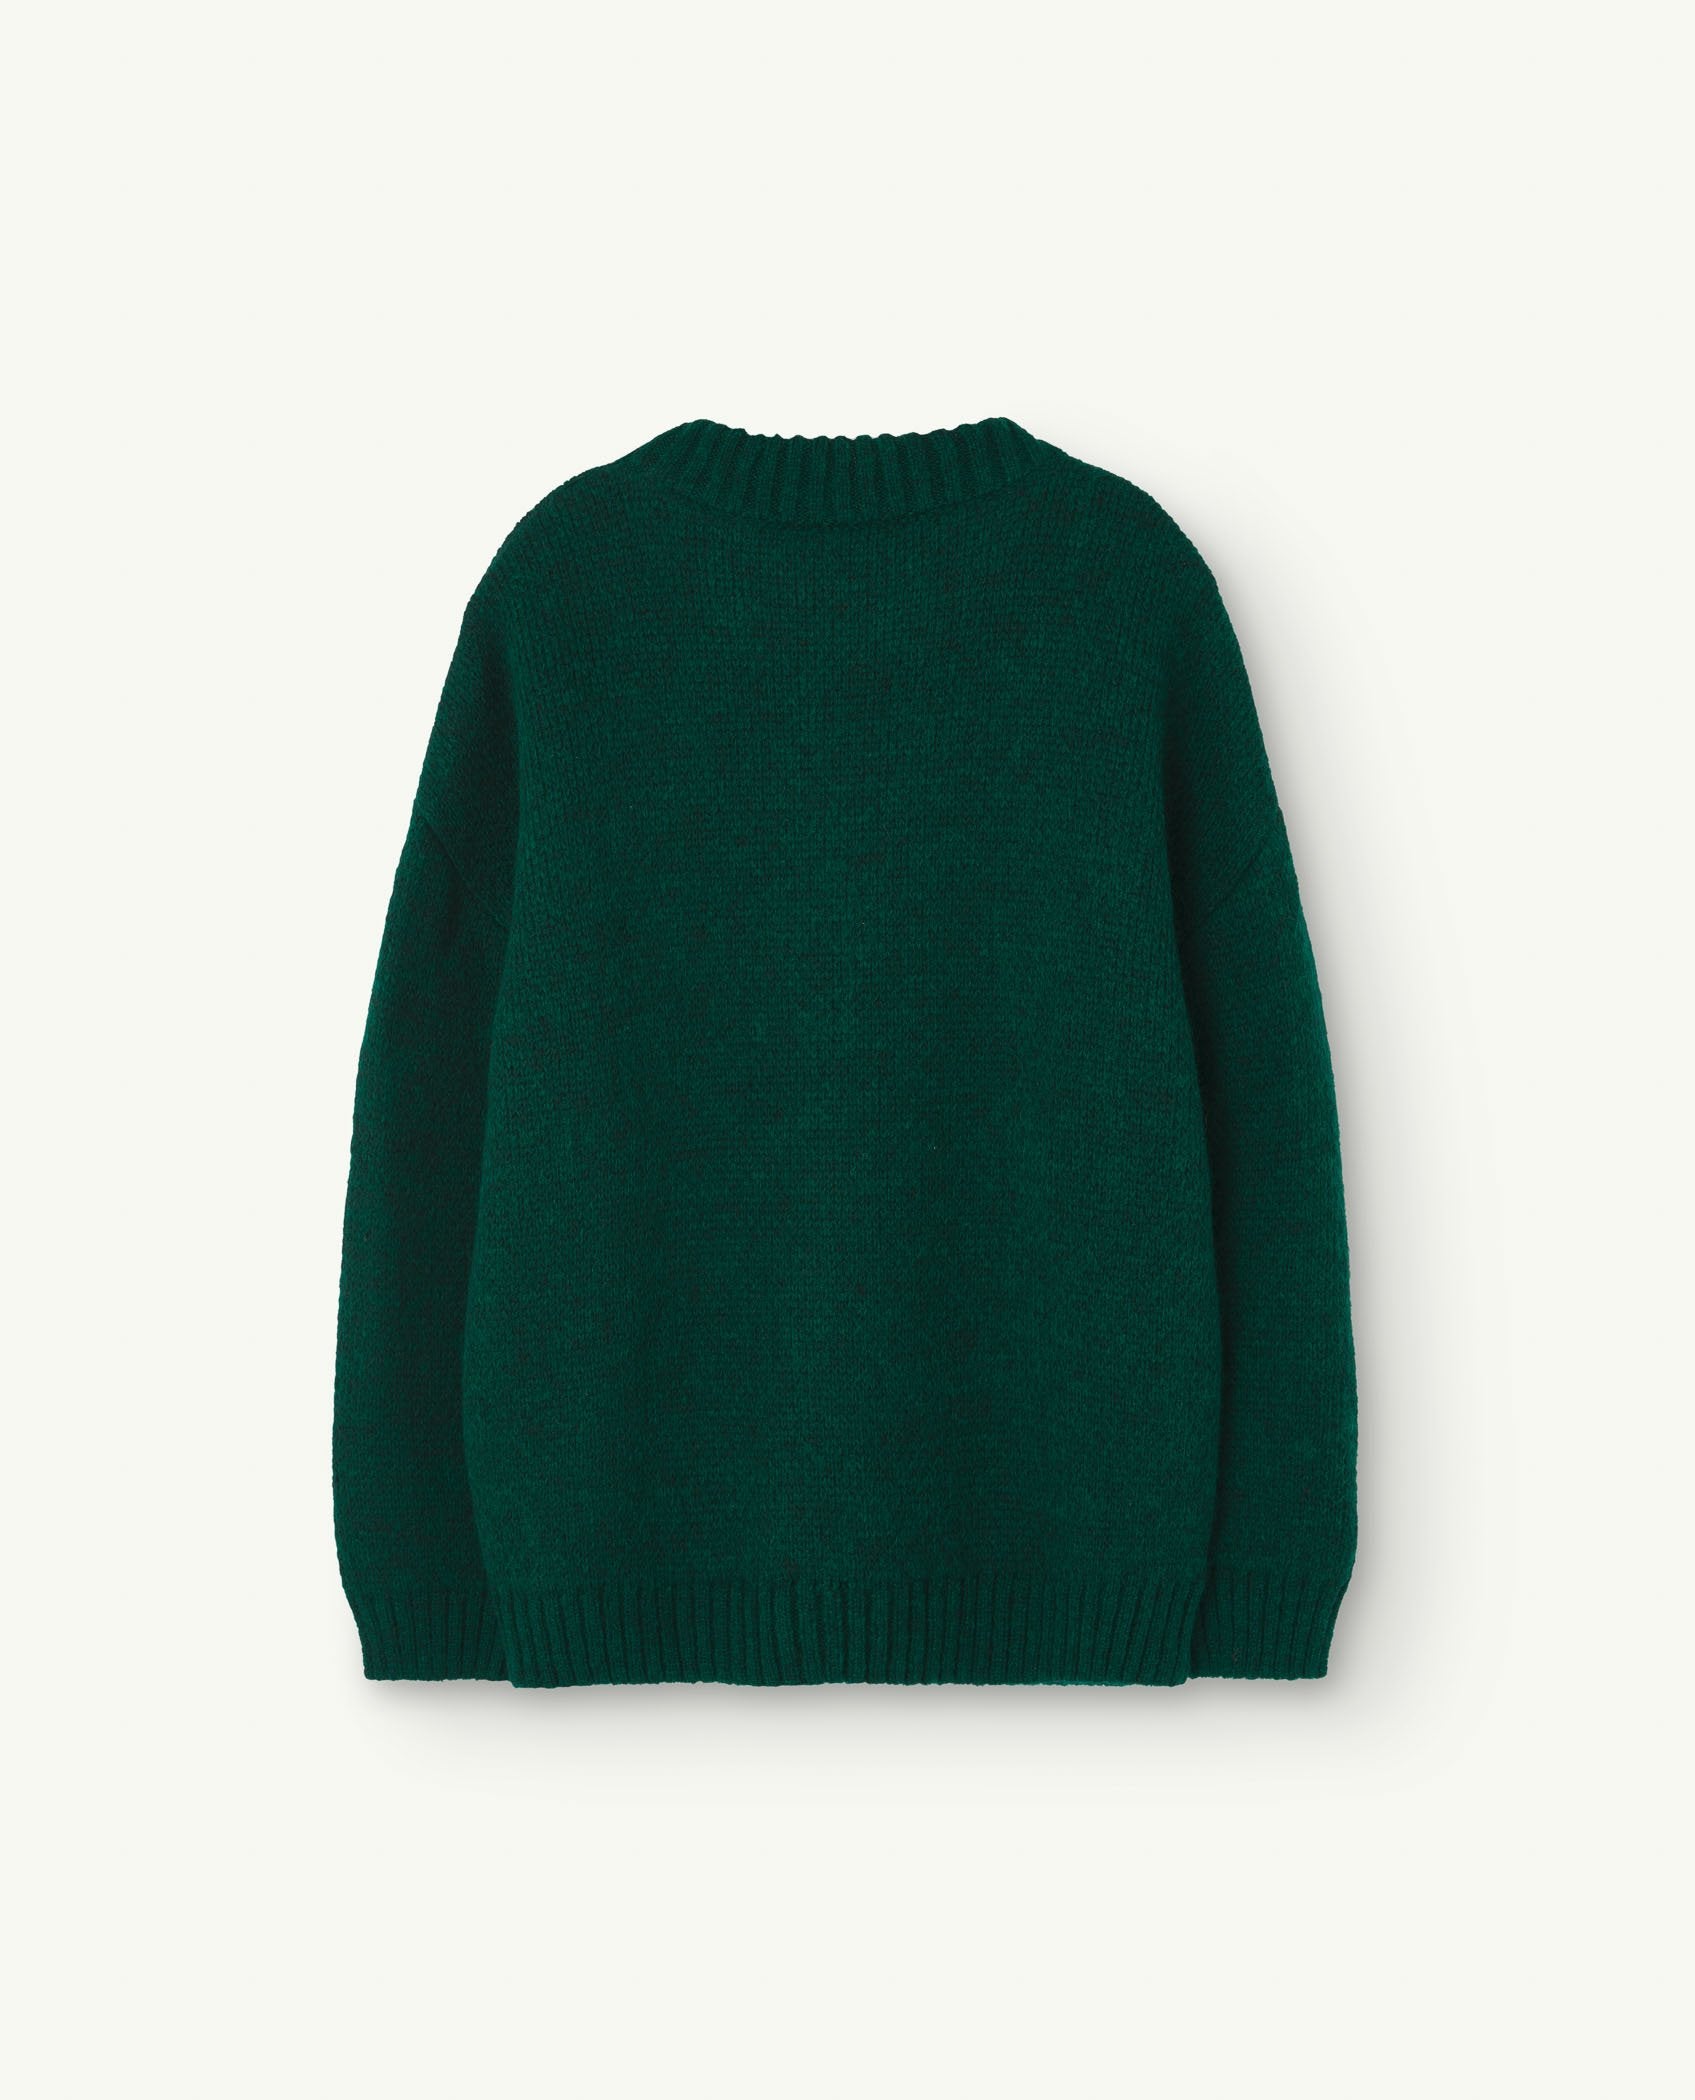 Green Poodle Bull Sweater PRODUCT BACK